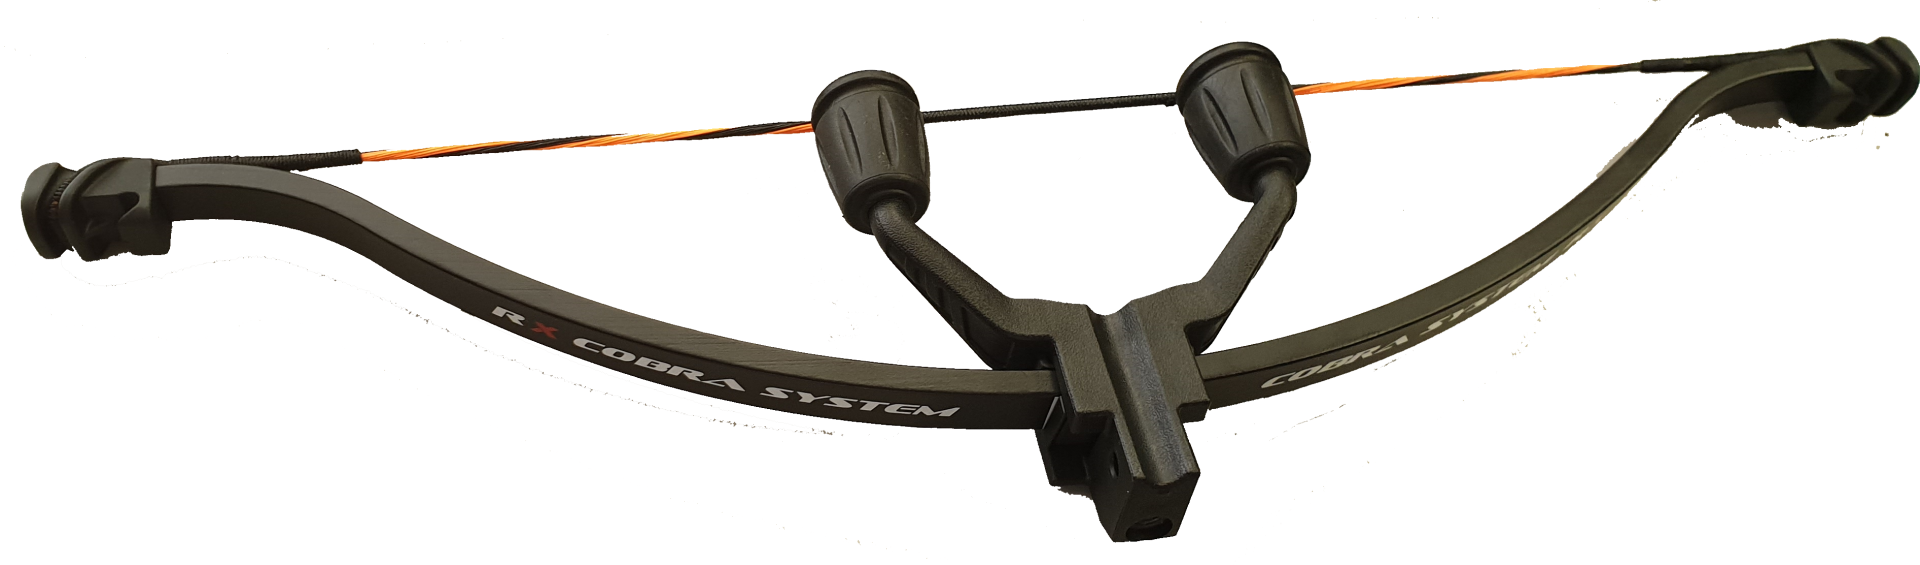 Replacement bow with string stopper for crossbow Adder, Cobra R9 and R10 - 130 lbs